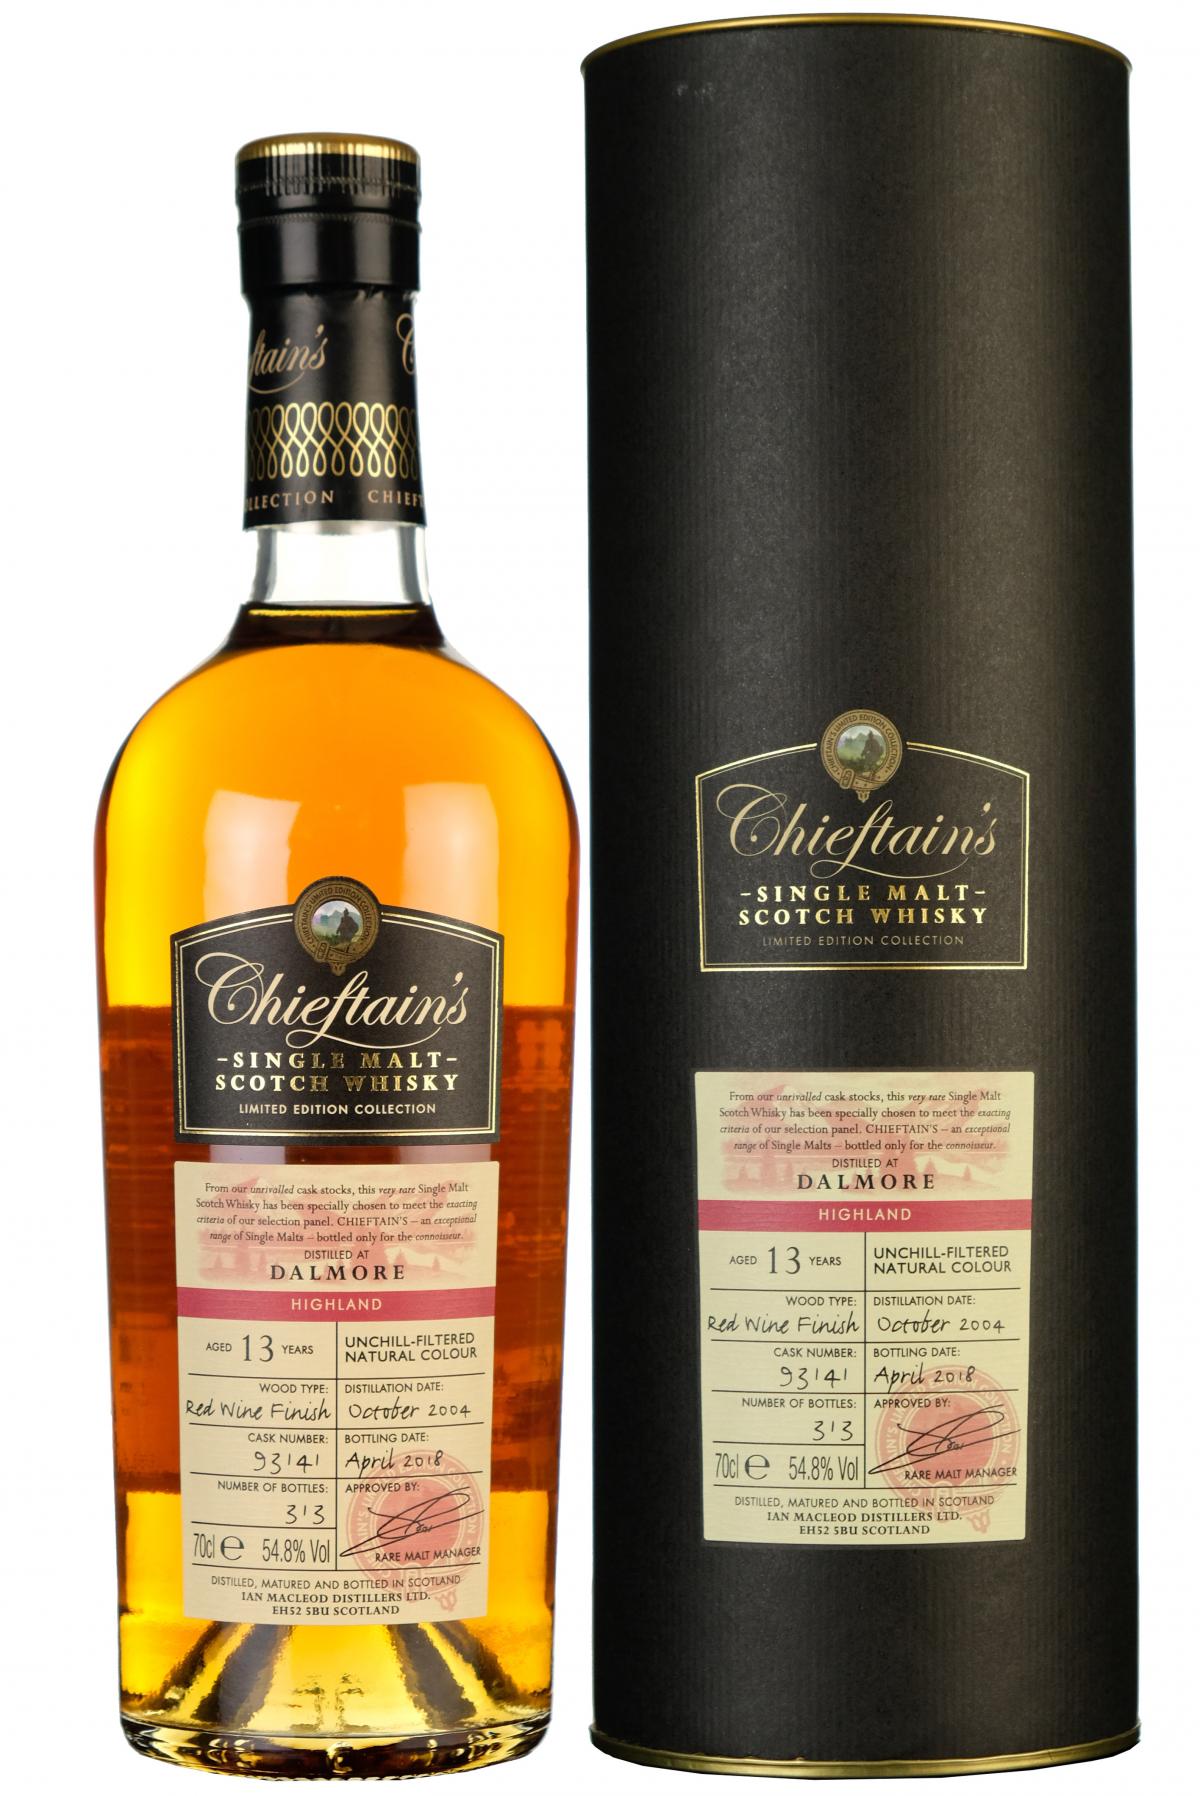 Dalmore 2004-2018 | 13 Year Old | Chieftain's | Cask 33141